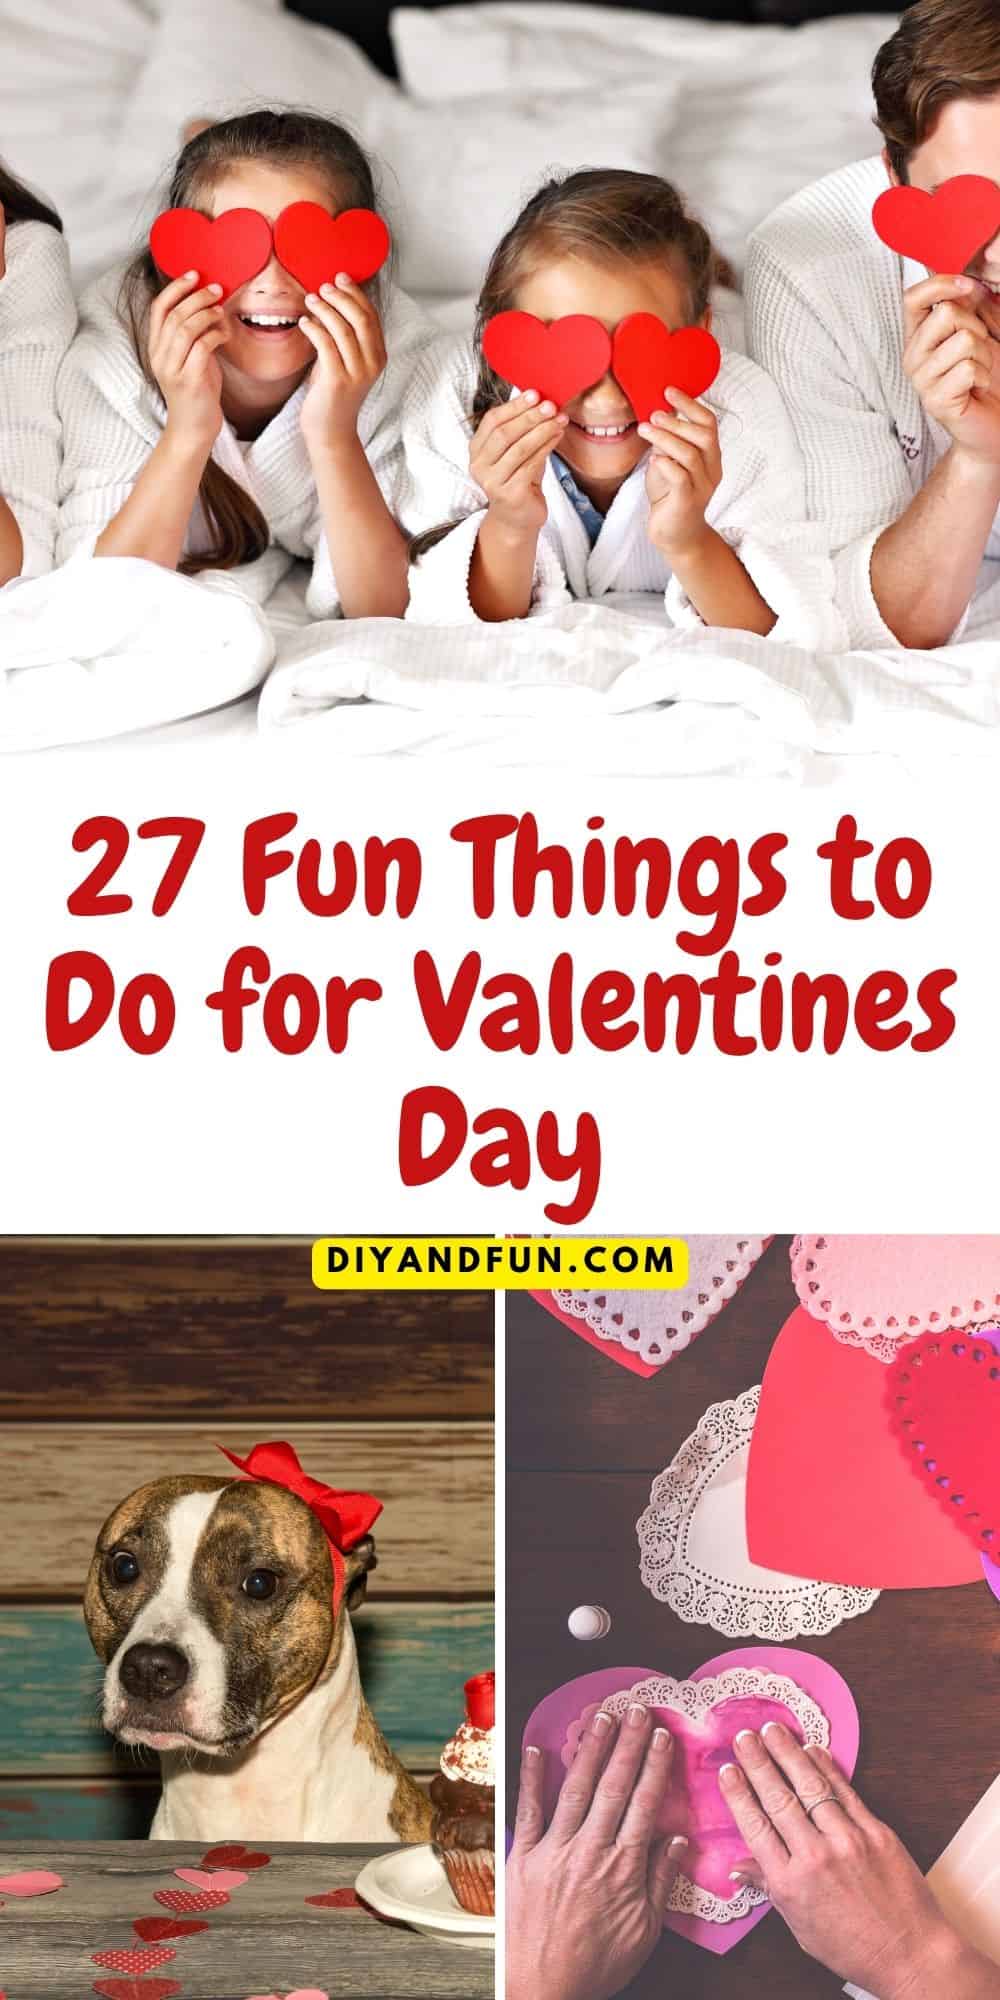 27 Fun Things to Do for Valentines Day, a listing of family oriented activities, recipes, and diy craft ideas.